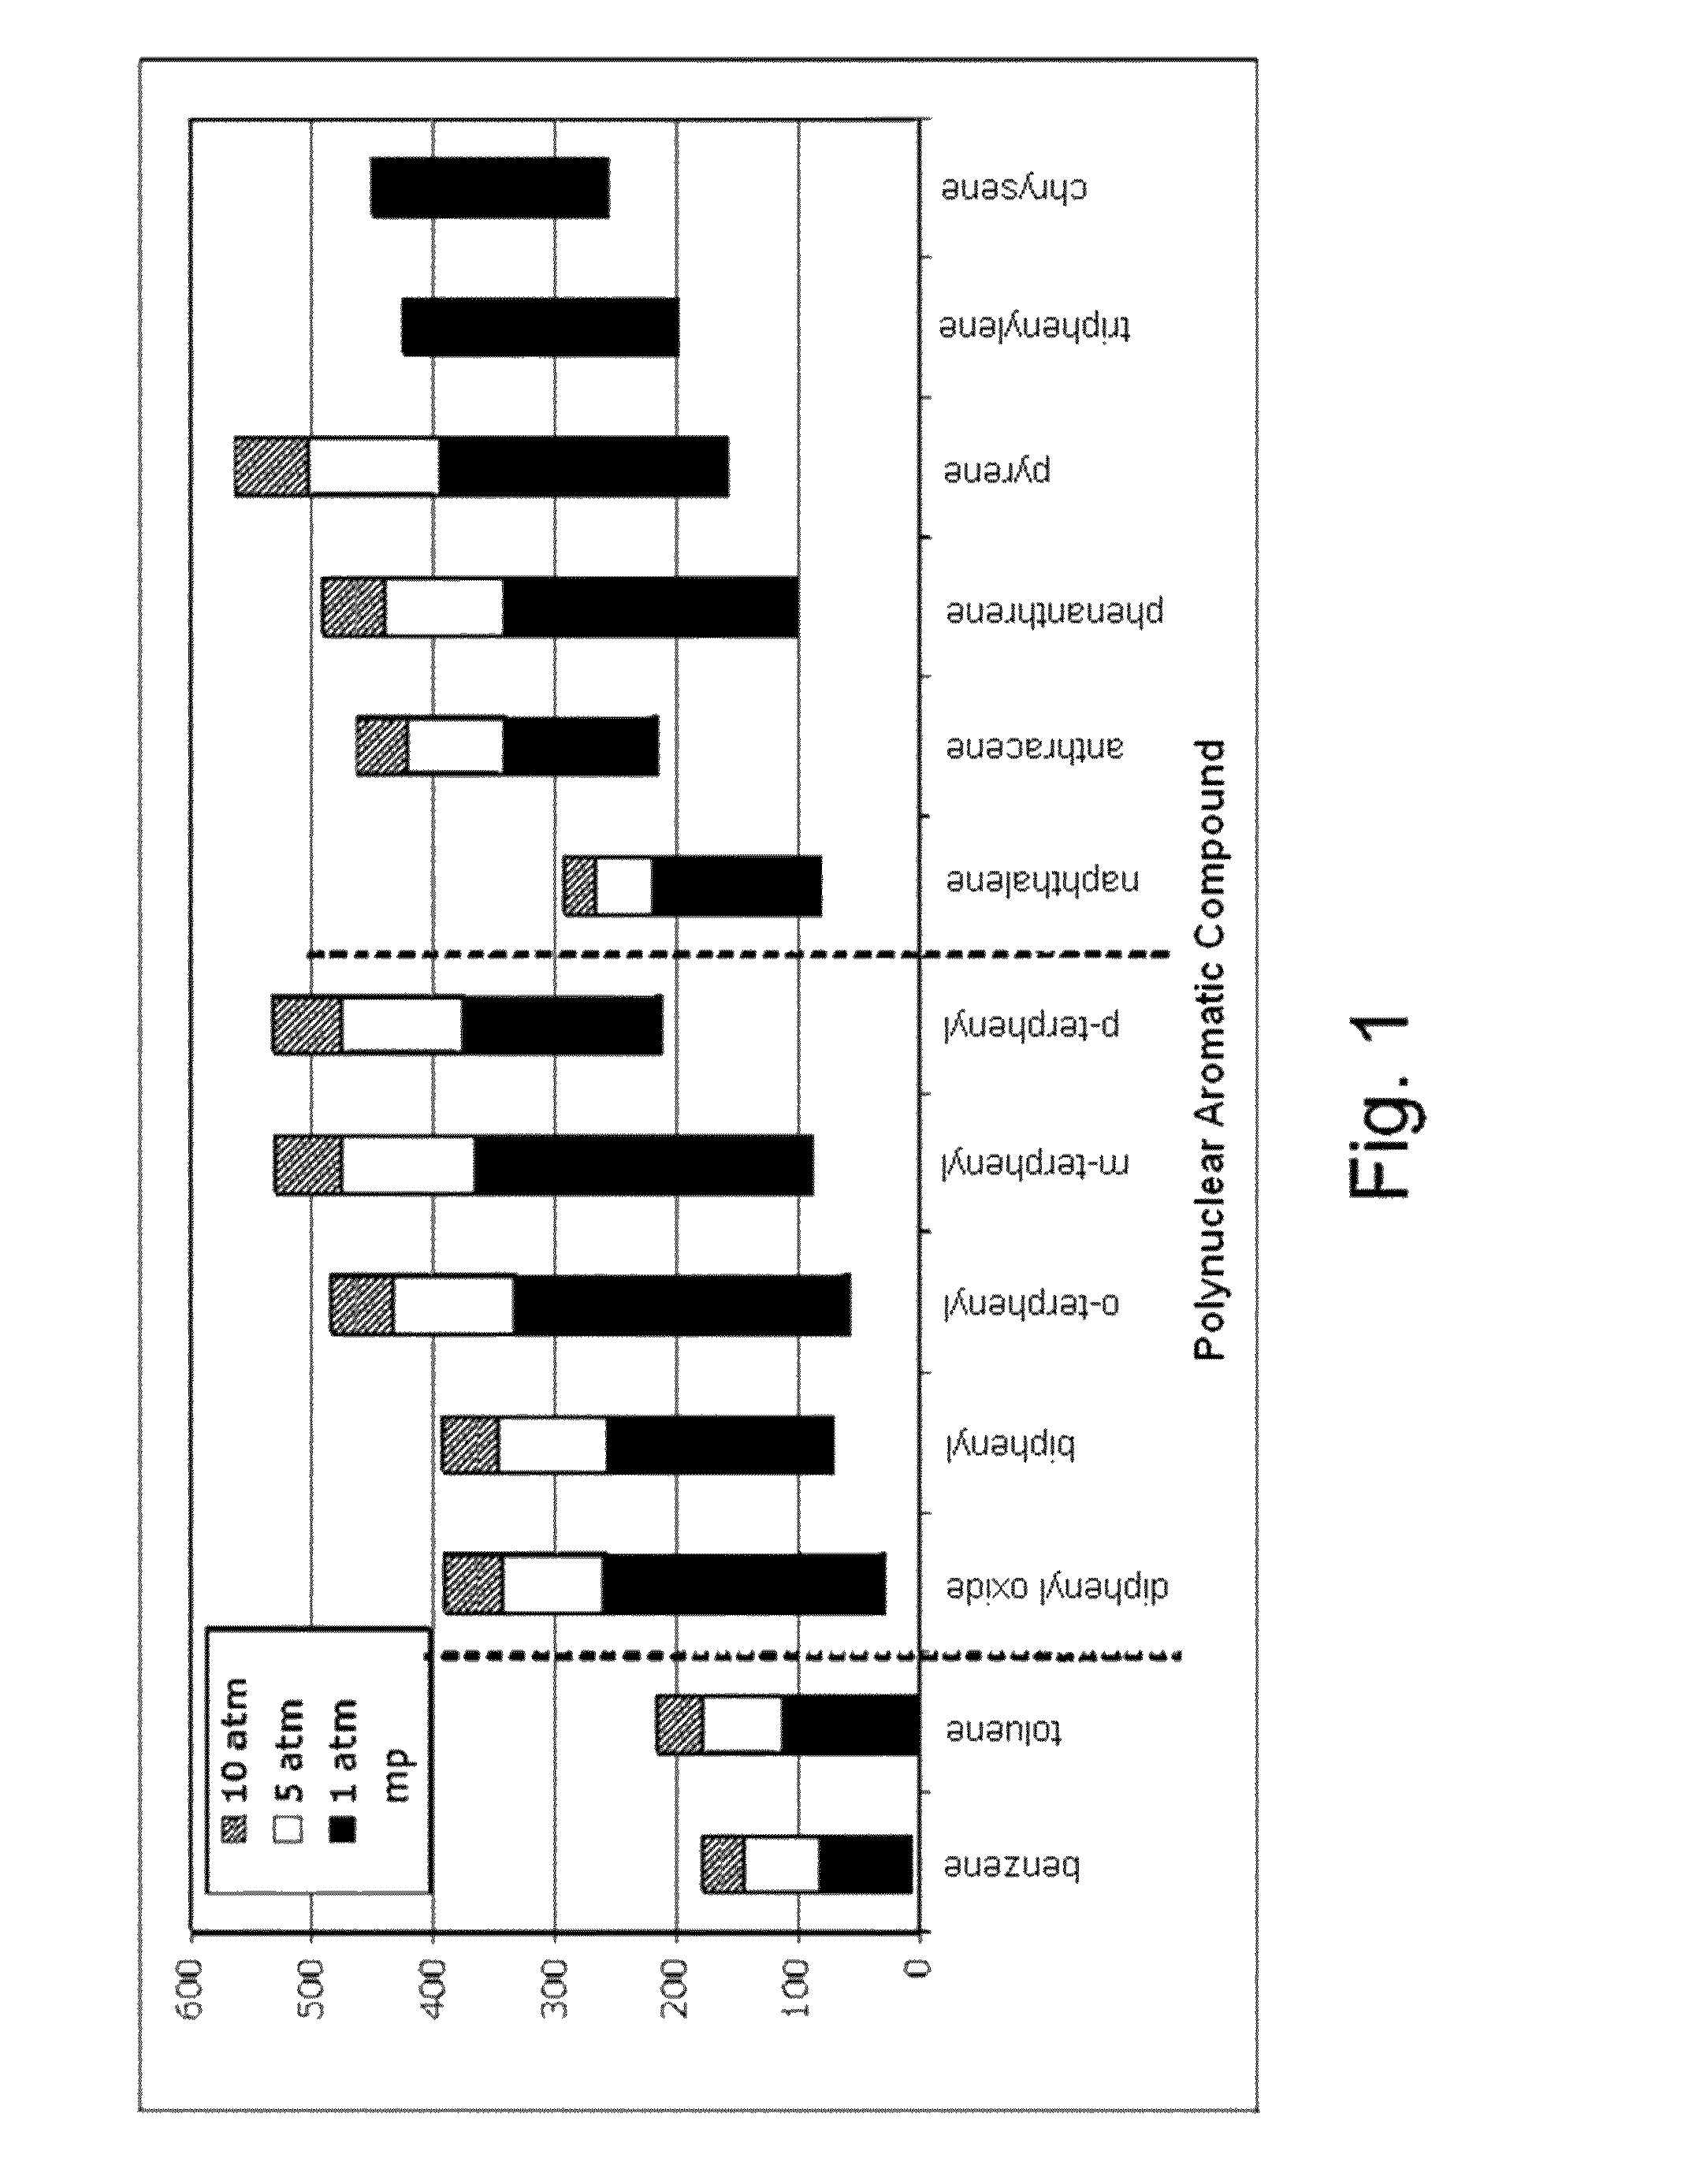 Extended-range heat transfer fluid using variable composition